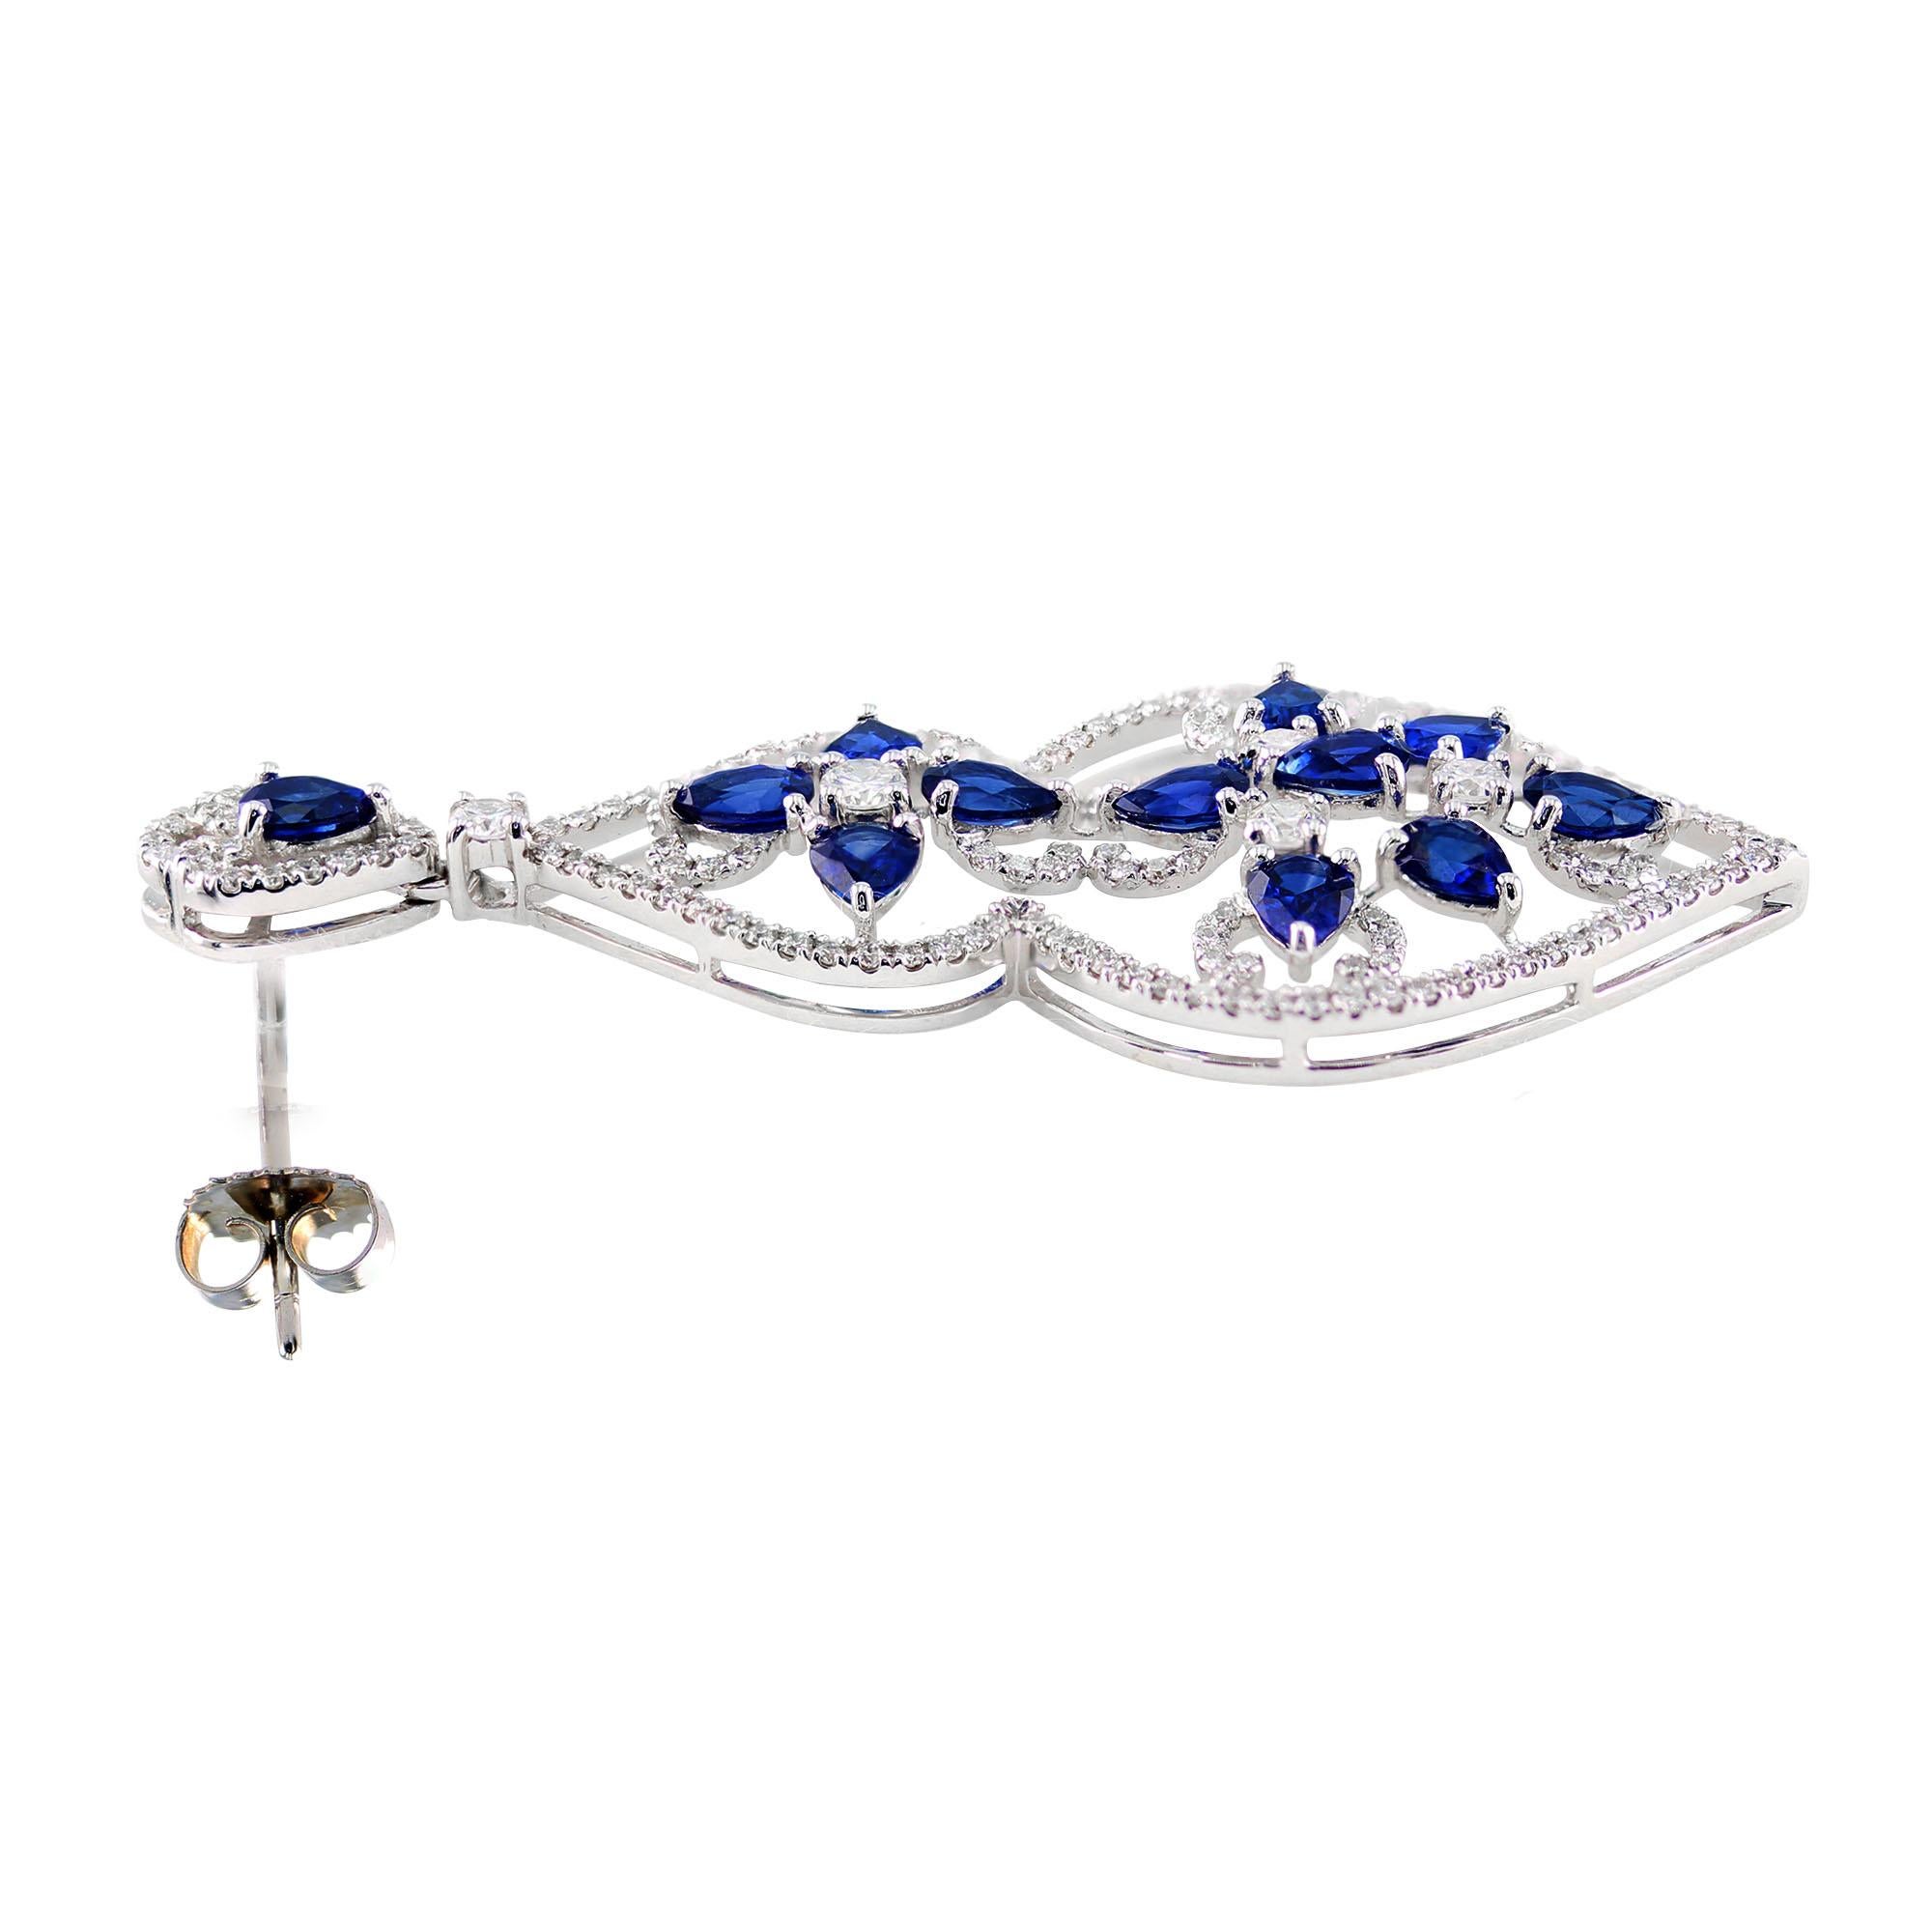 4.29 carat sapphire dangle earrings, complimented by 1.50 carat round diamonds, total weight.

Set in 18K

With its intricate design and exquisite attention to detail, step out in these absolutely stunning and elegant eye catching earrings, perfect